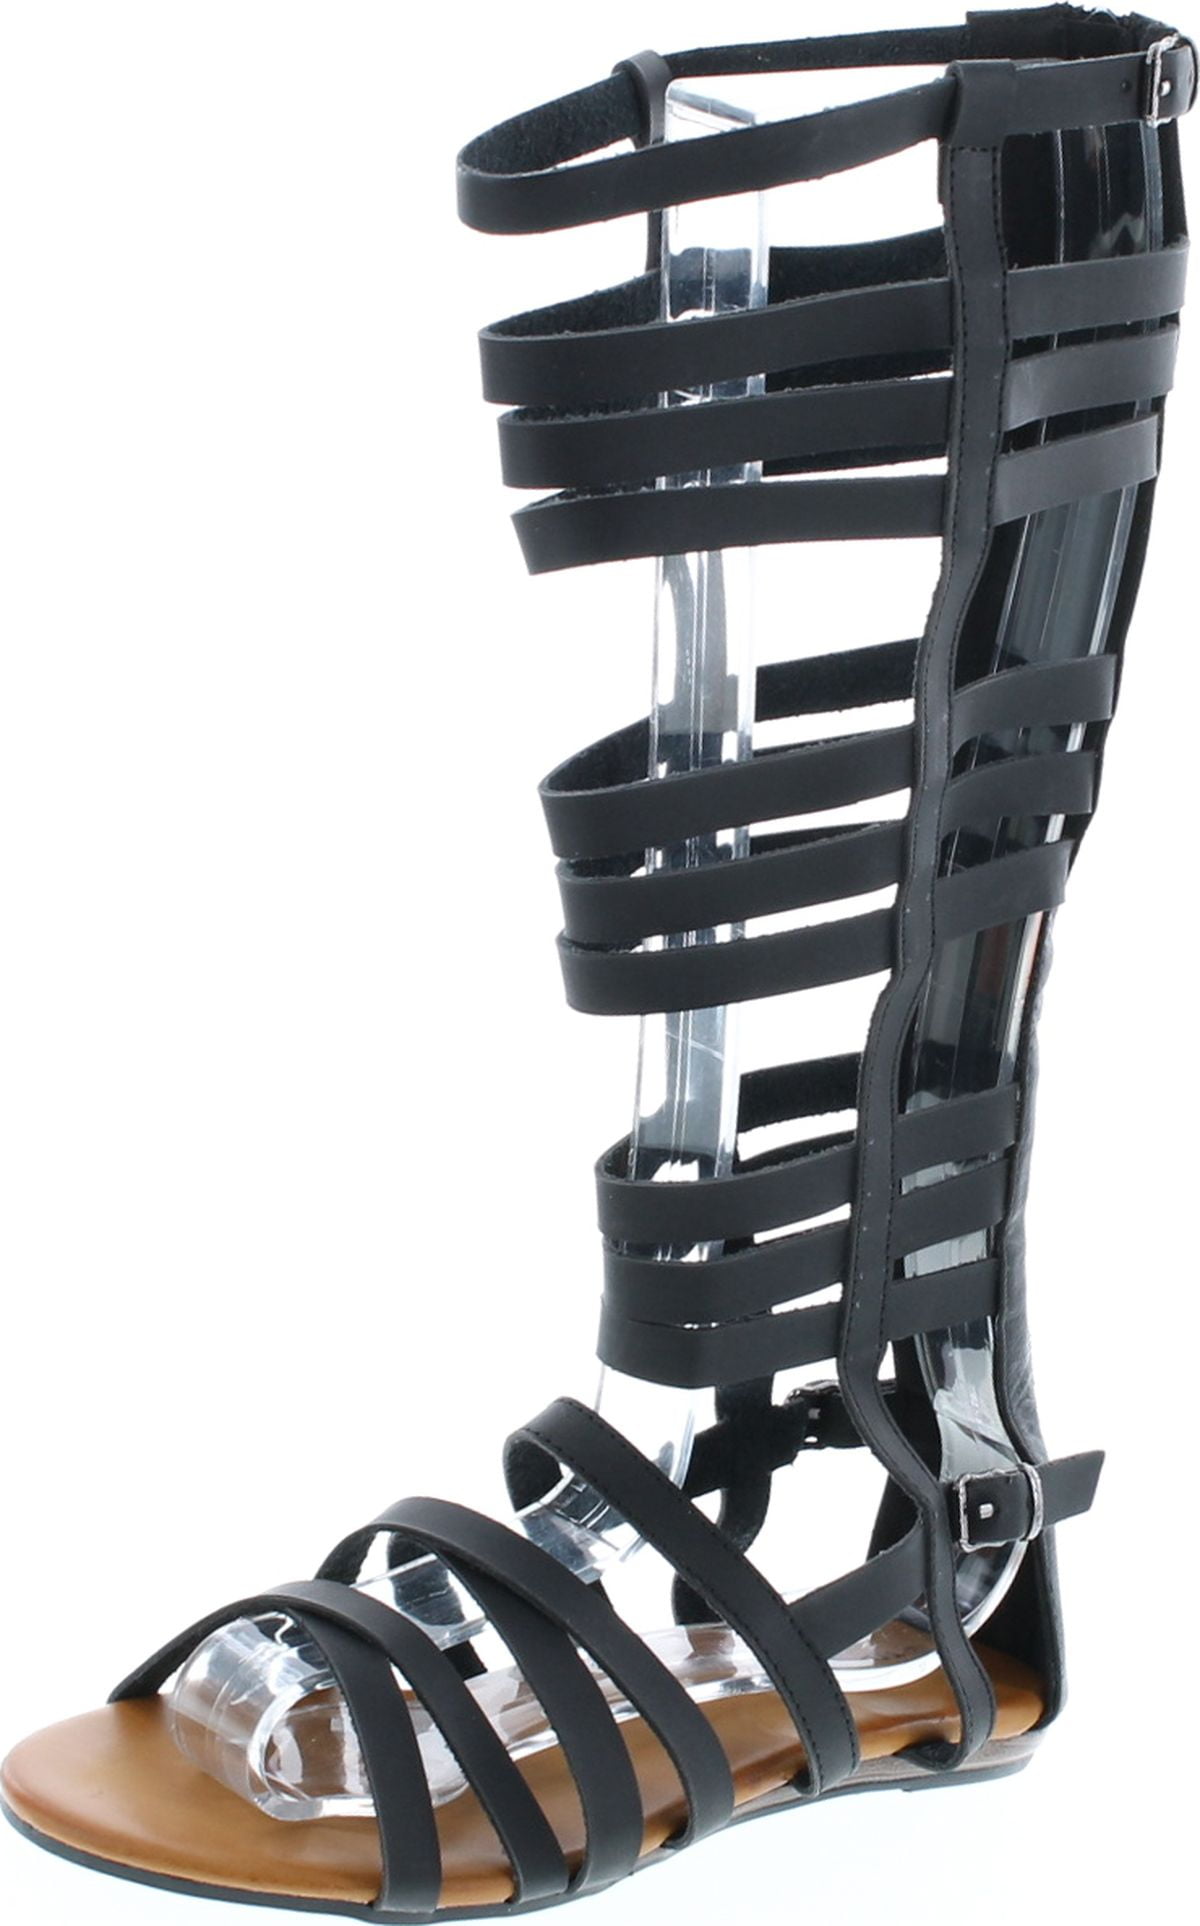 NEW BLACK SANDALS BLACK SANDALS WITH BACK ZIP GLADIATOR SHOES           MARIPOSA 